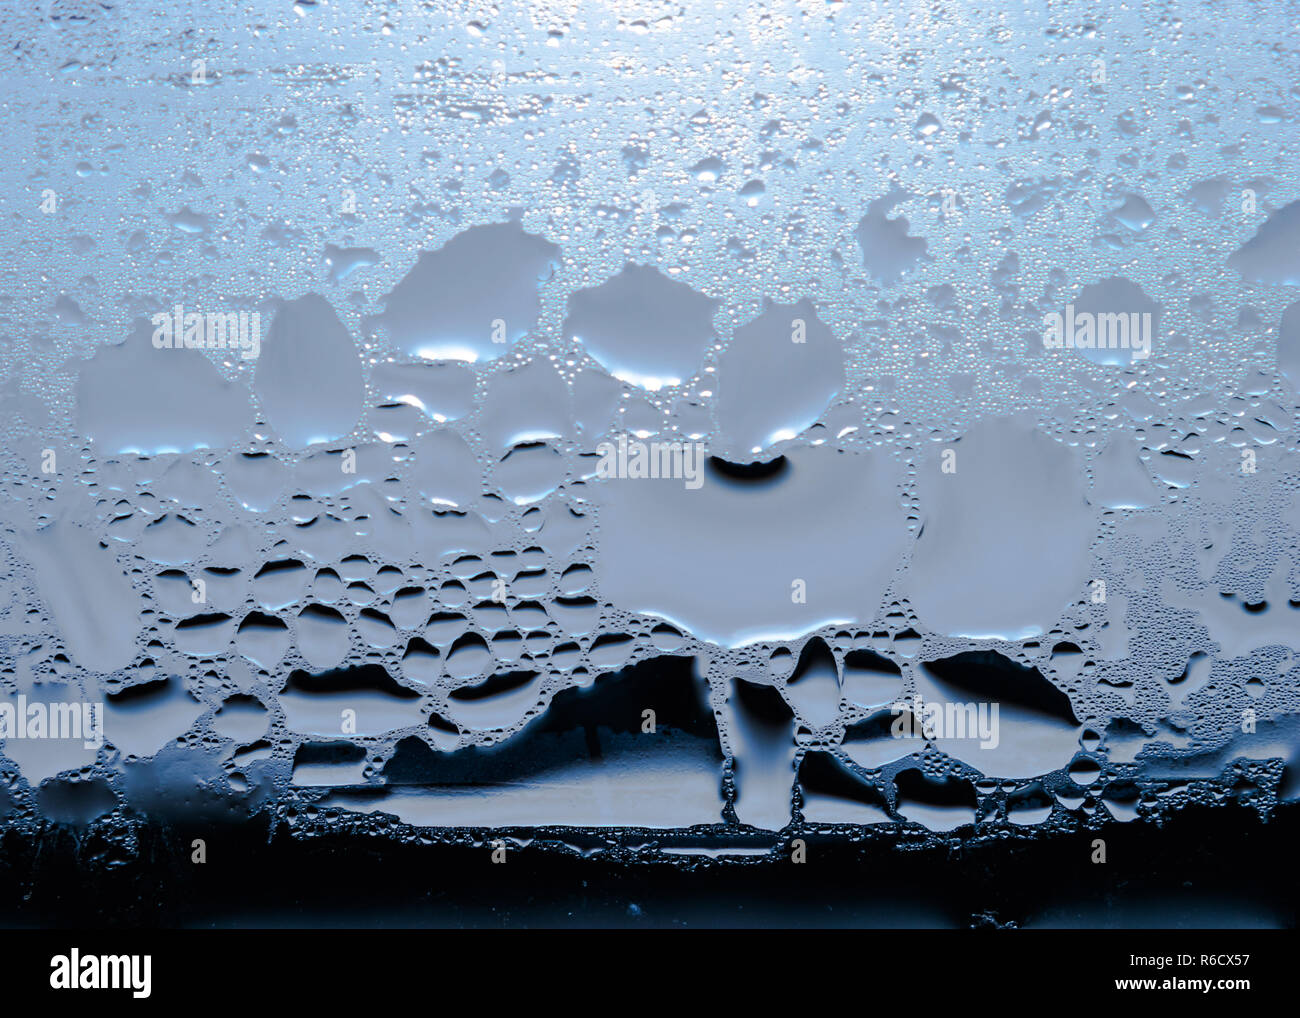 Condensation, Vapor, Rain, Water Drops Of Various Sizes On A Glass Surface. Stock Photo